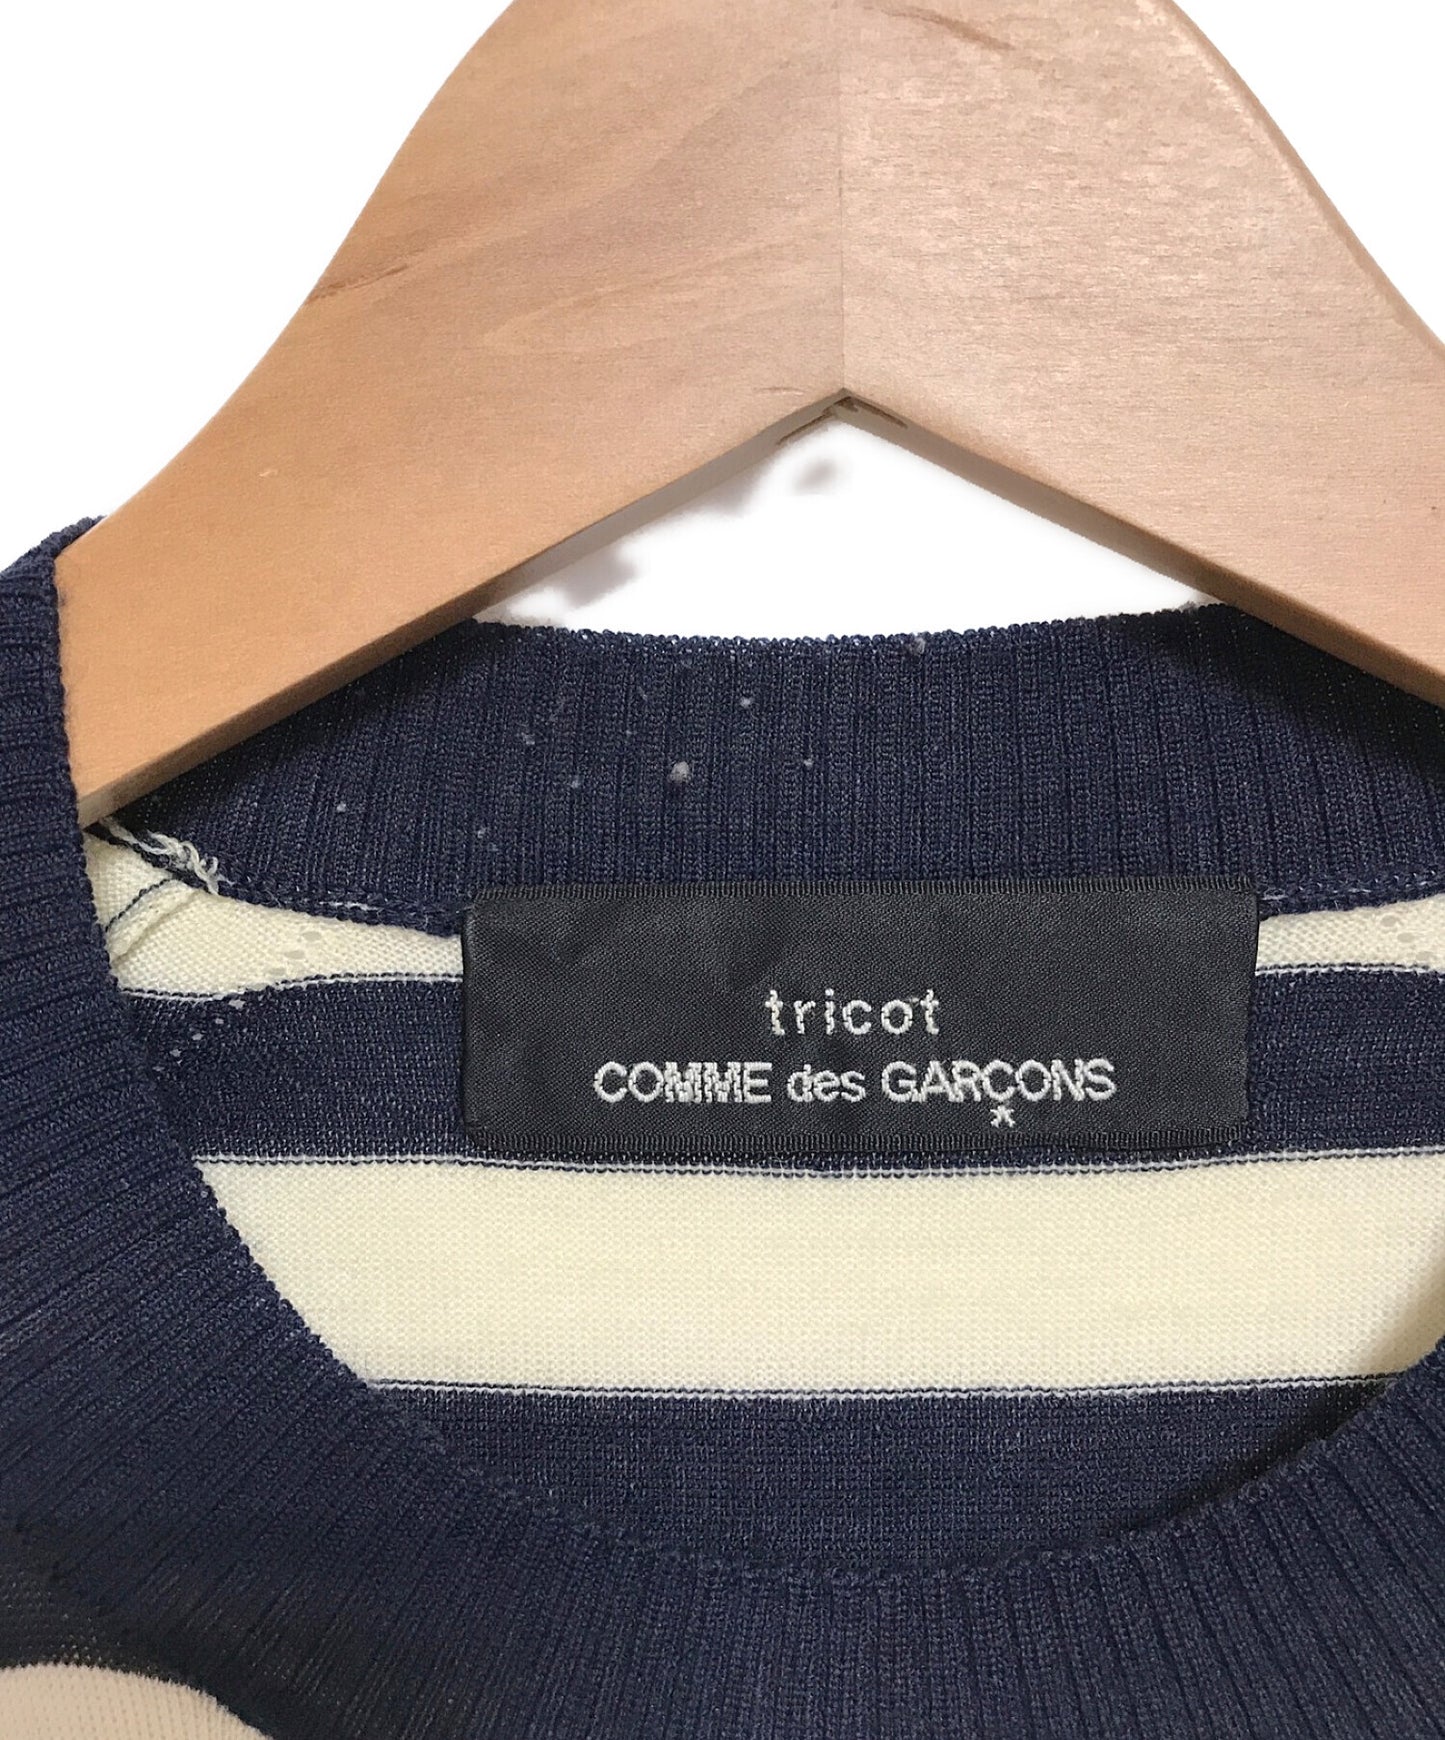 Tricot Comme des Garcons边框针织连衣裙TF-N001